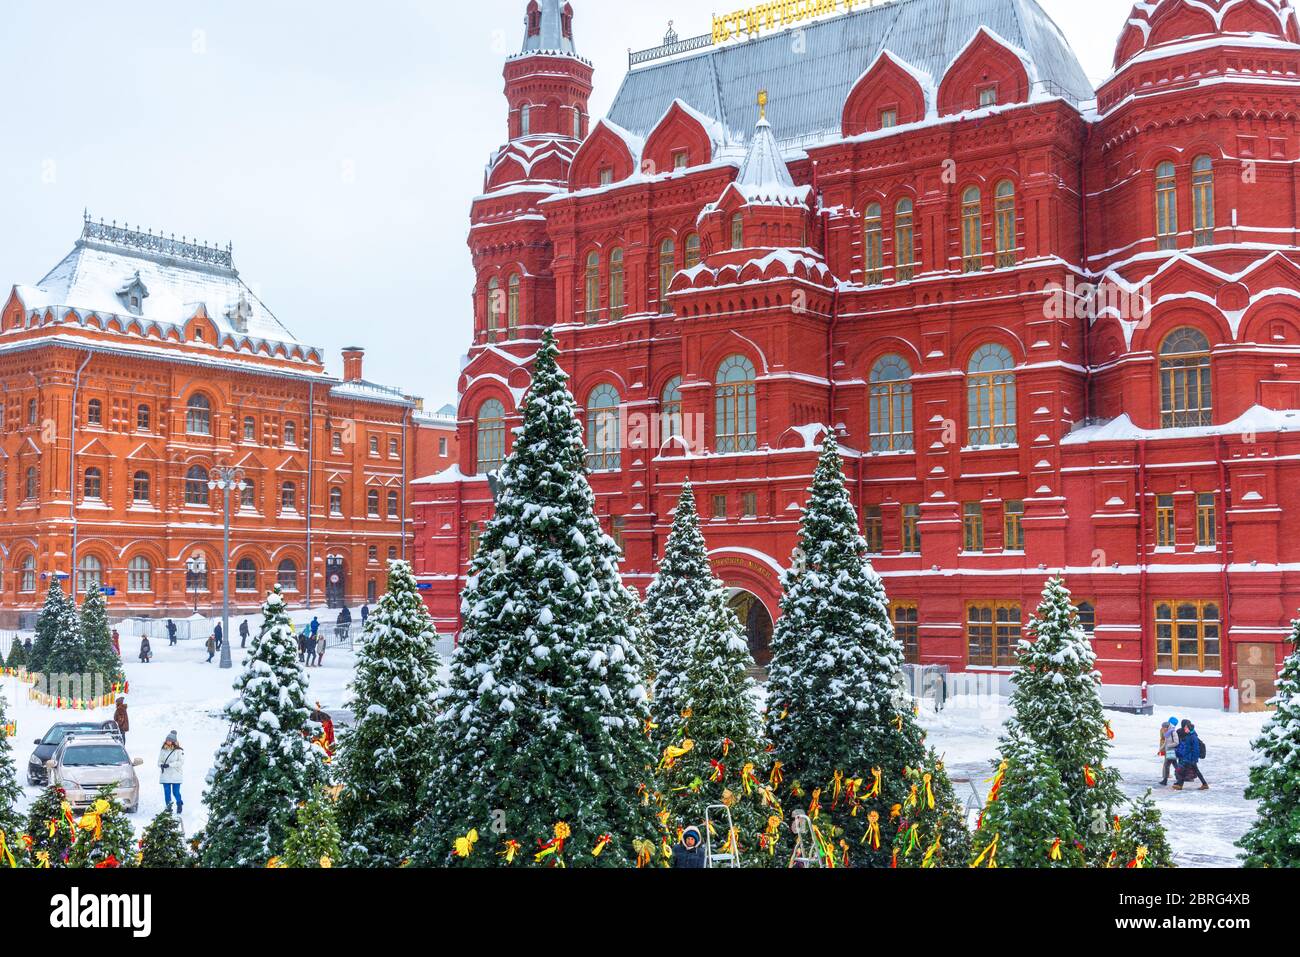 Moscow, Russia - Feb 5, 2018: Snowy Moscow center in winter. Christmas trees overlooking the State Historical Museum during snowfall. Old nice archite Stock Photo